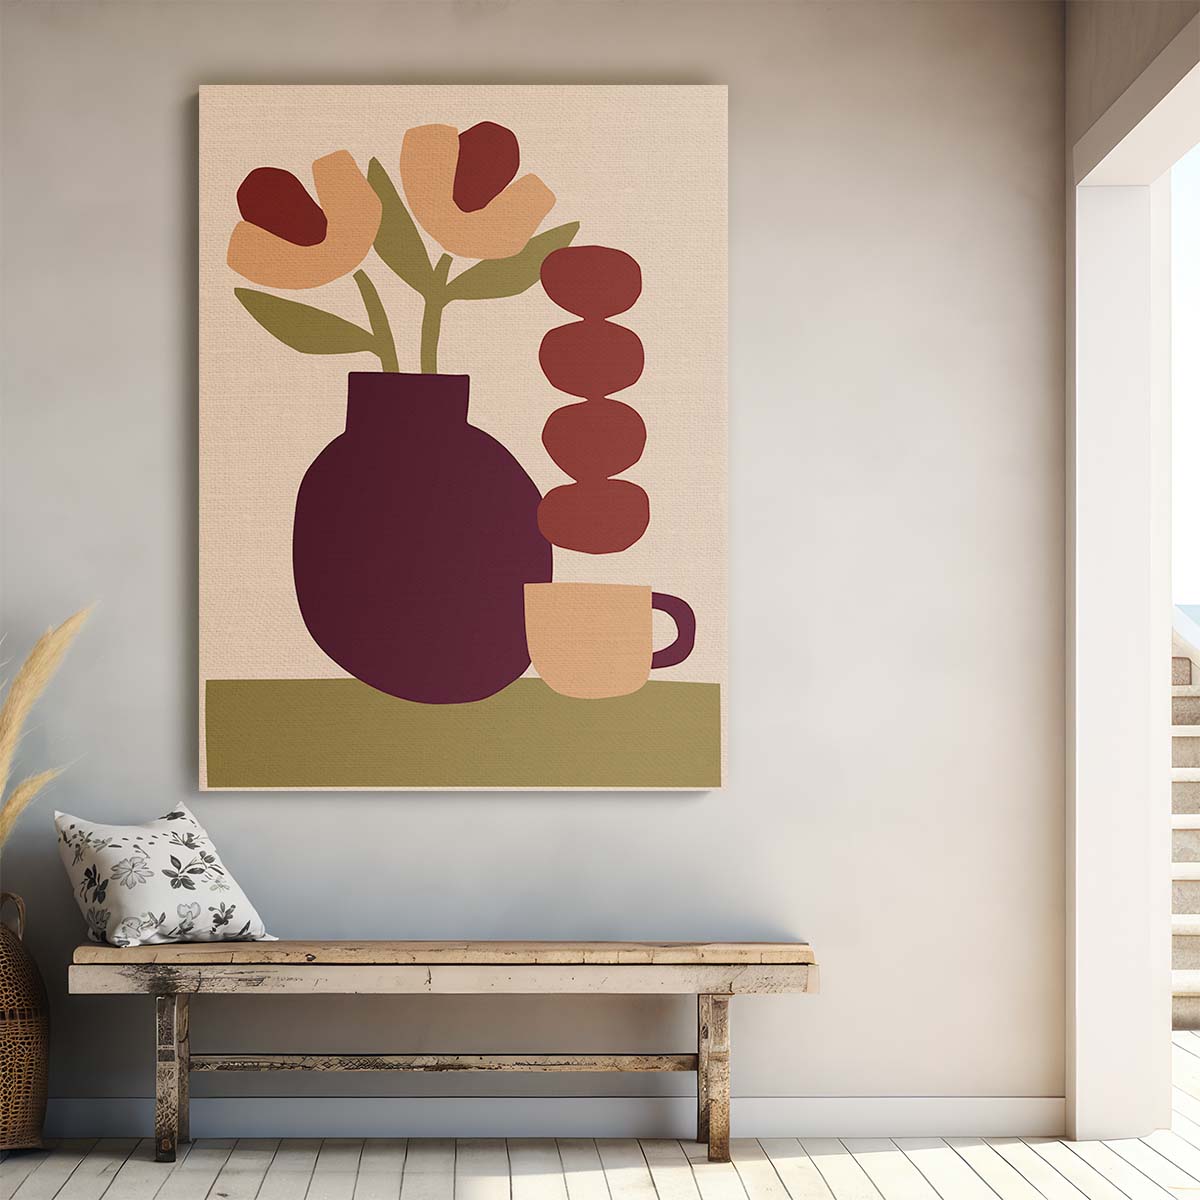 Floral Abstraction Illustration Purple Flowers in Vase, by Margaux Fugier by Luxuriance Designs, made in USA